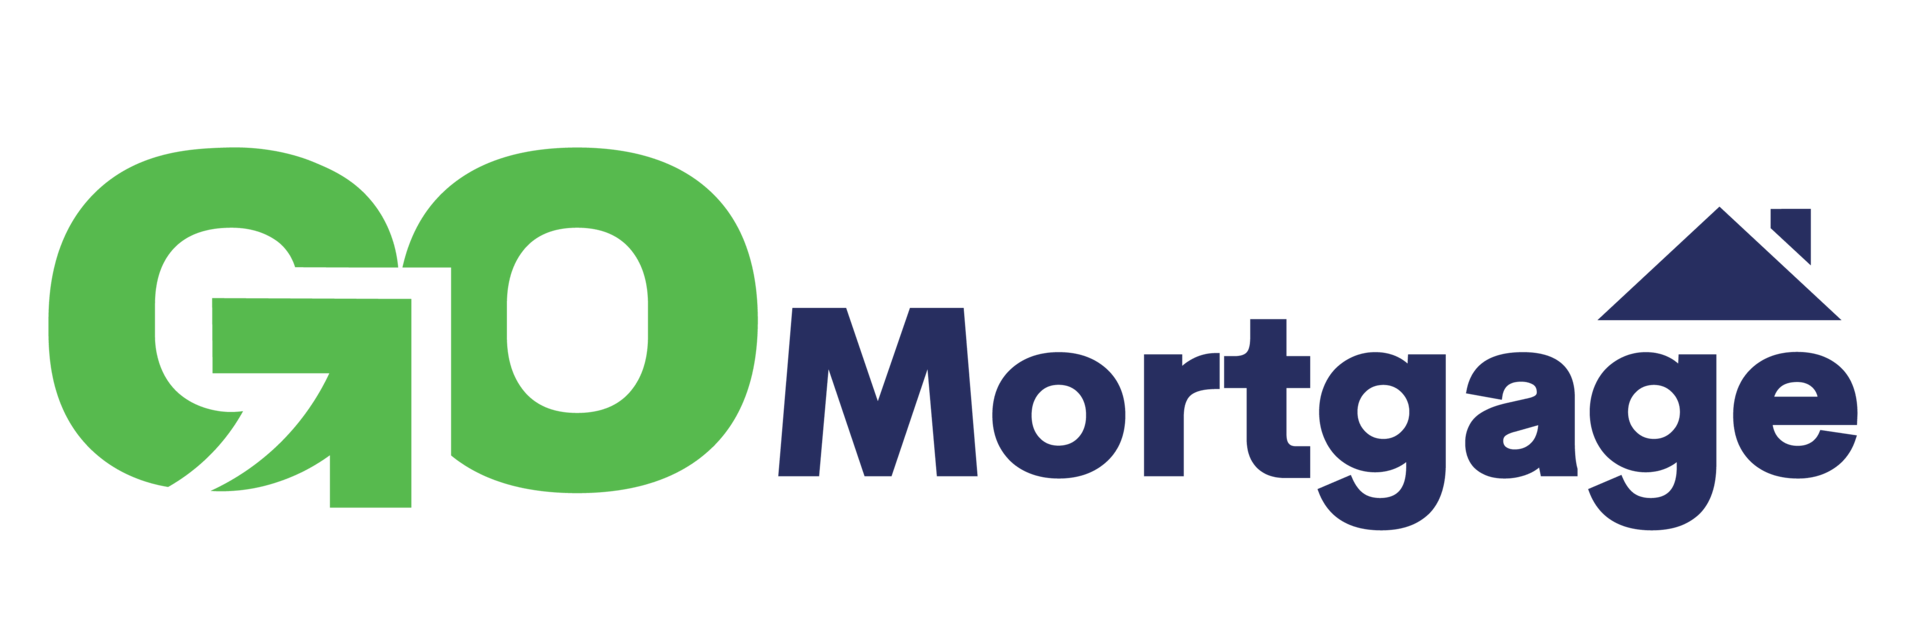 the go mortgage logo is green and blue with a blue roof .